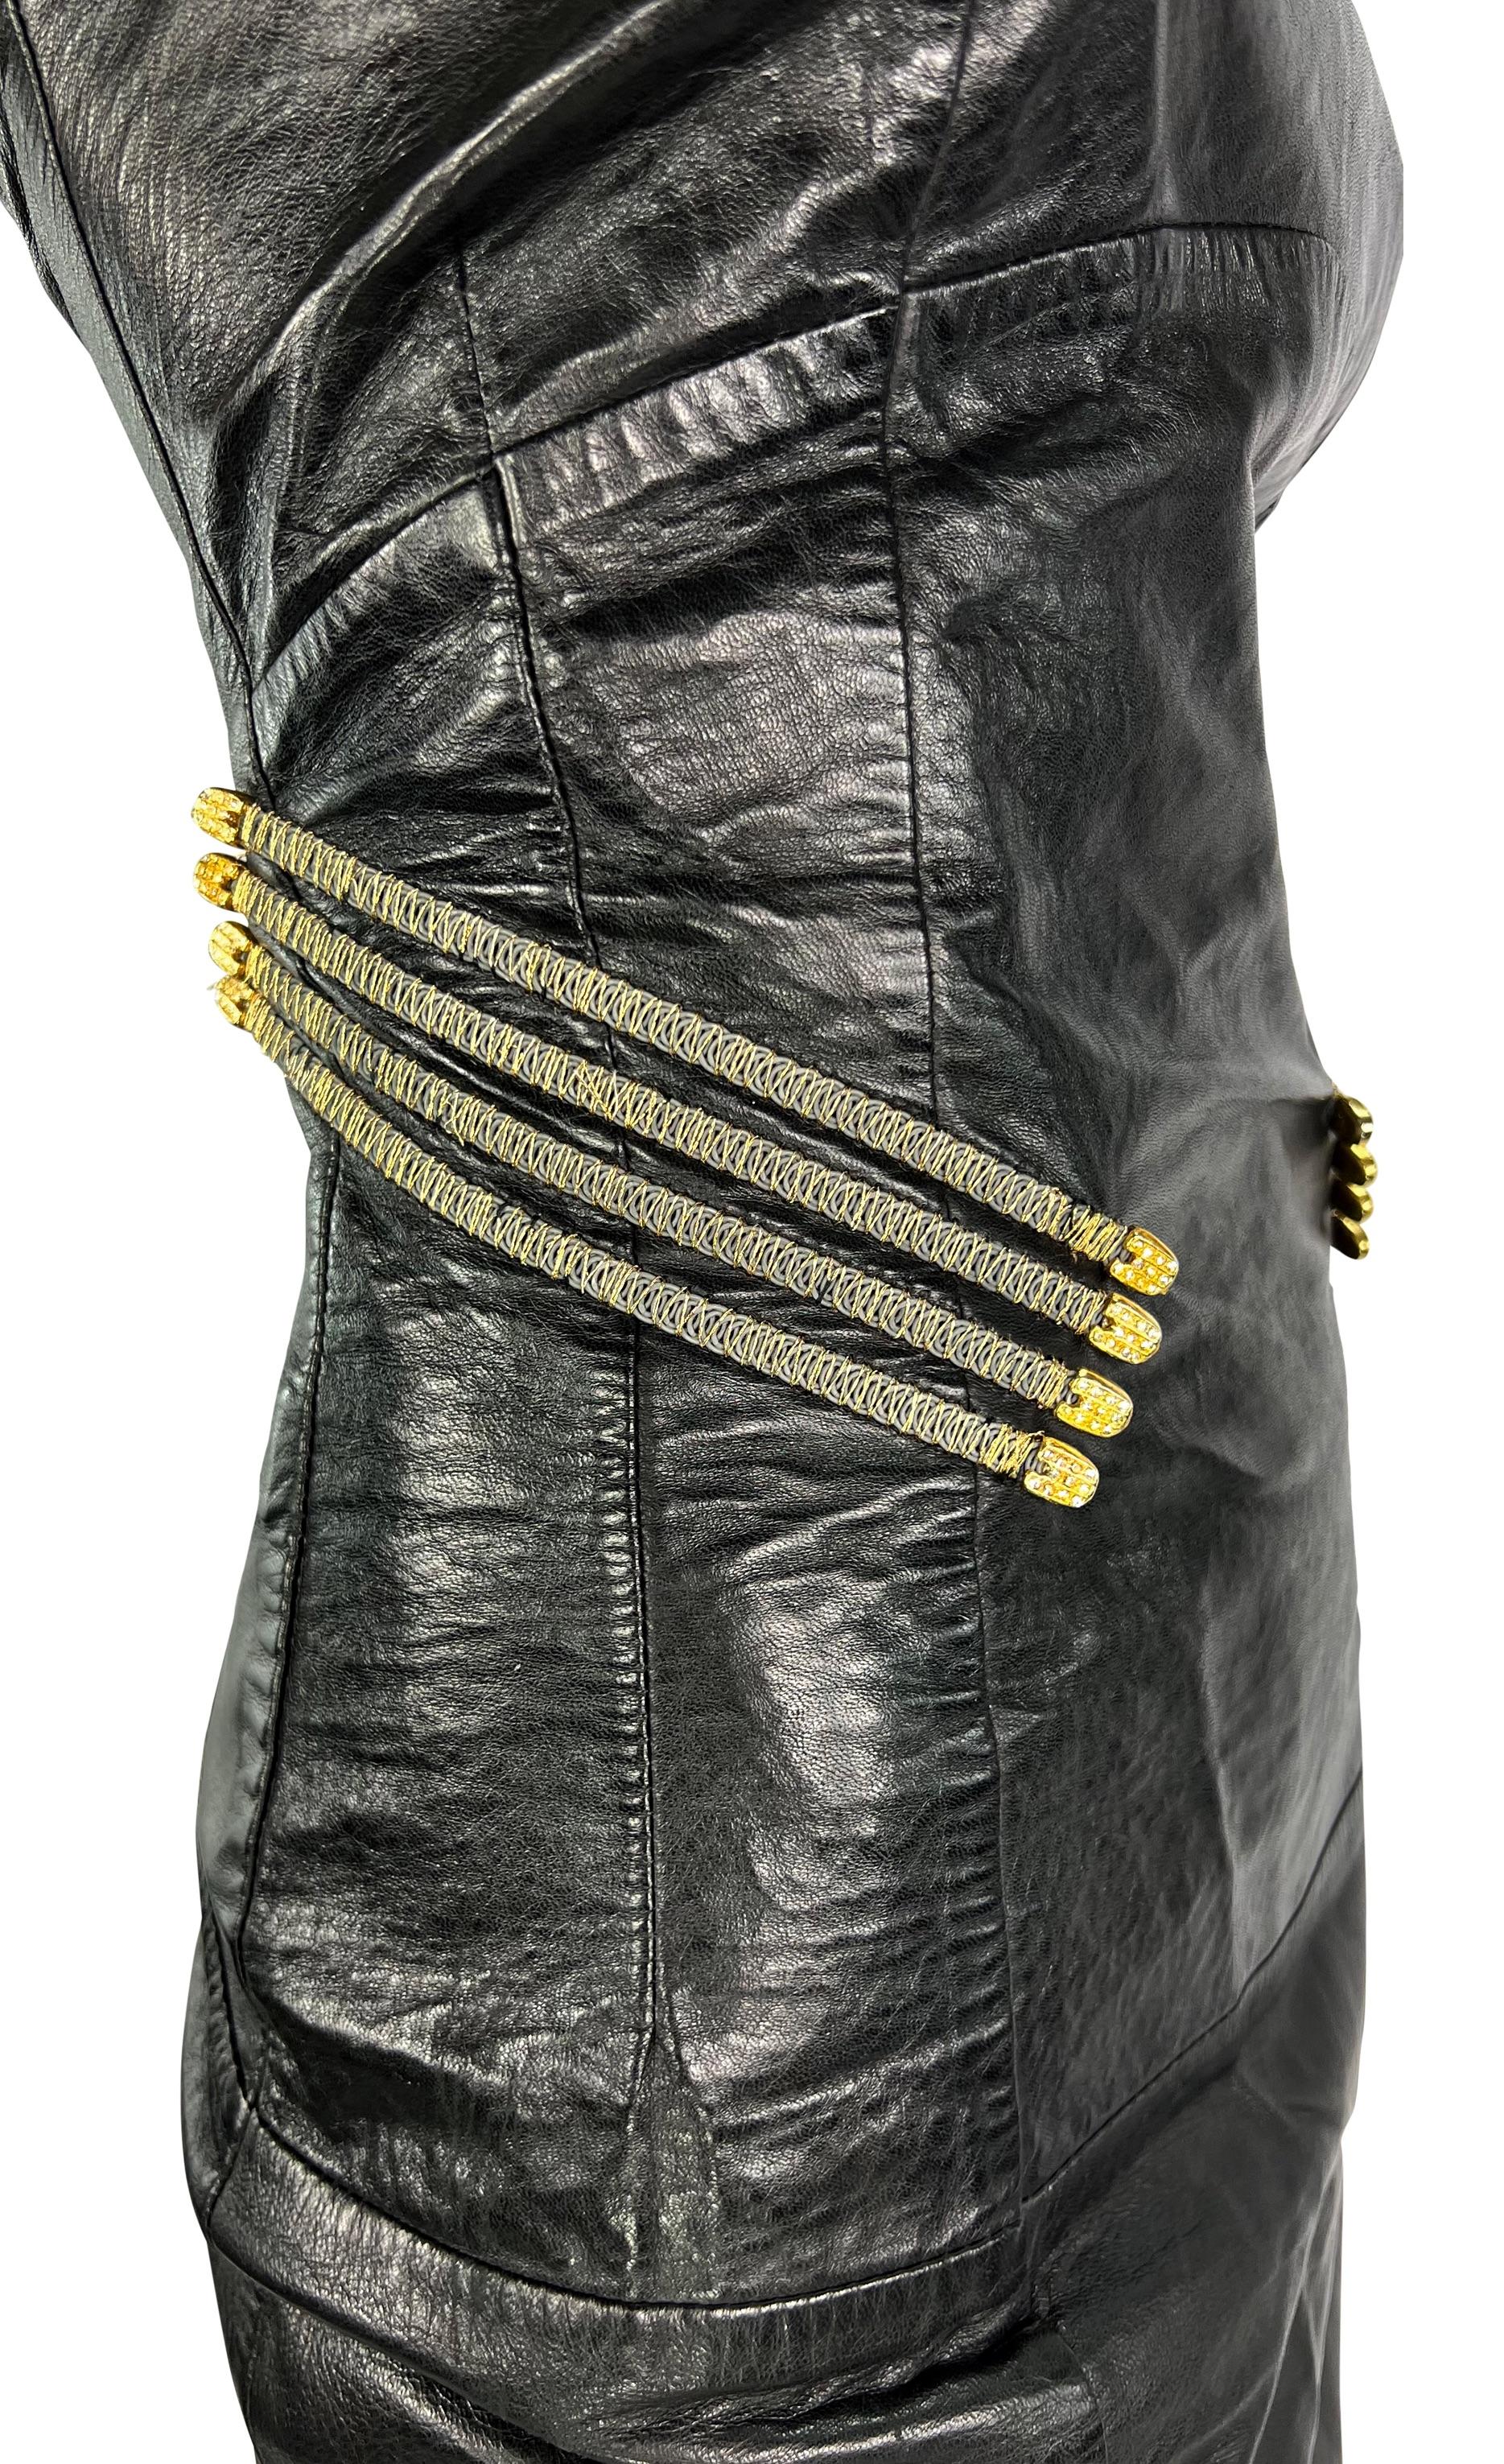 This fabulous Gianfranco Ferre leather mini dress is constructed entirely of black leather and features gold-tone accents on either side. This form-fitting slip-style mini dress from the Spring/Summer 1995 collection features a square neckline,